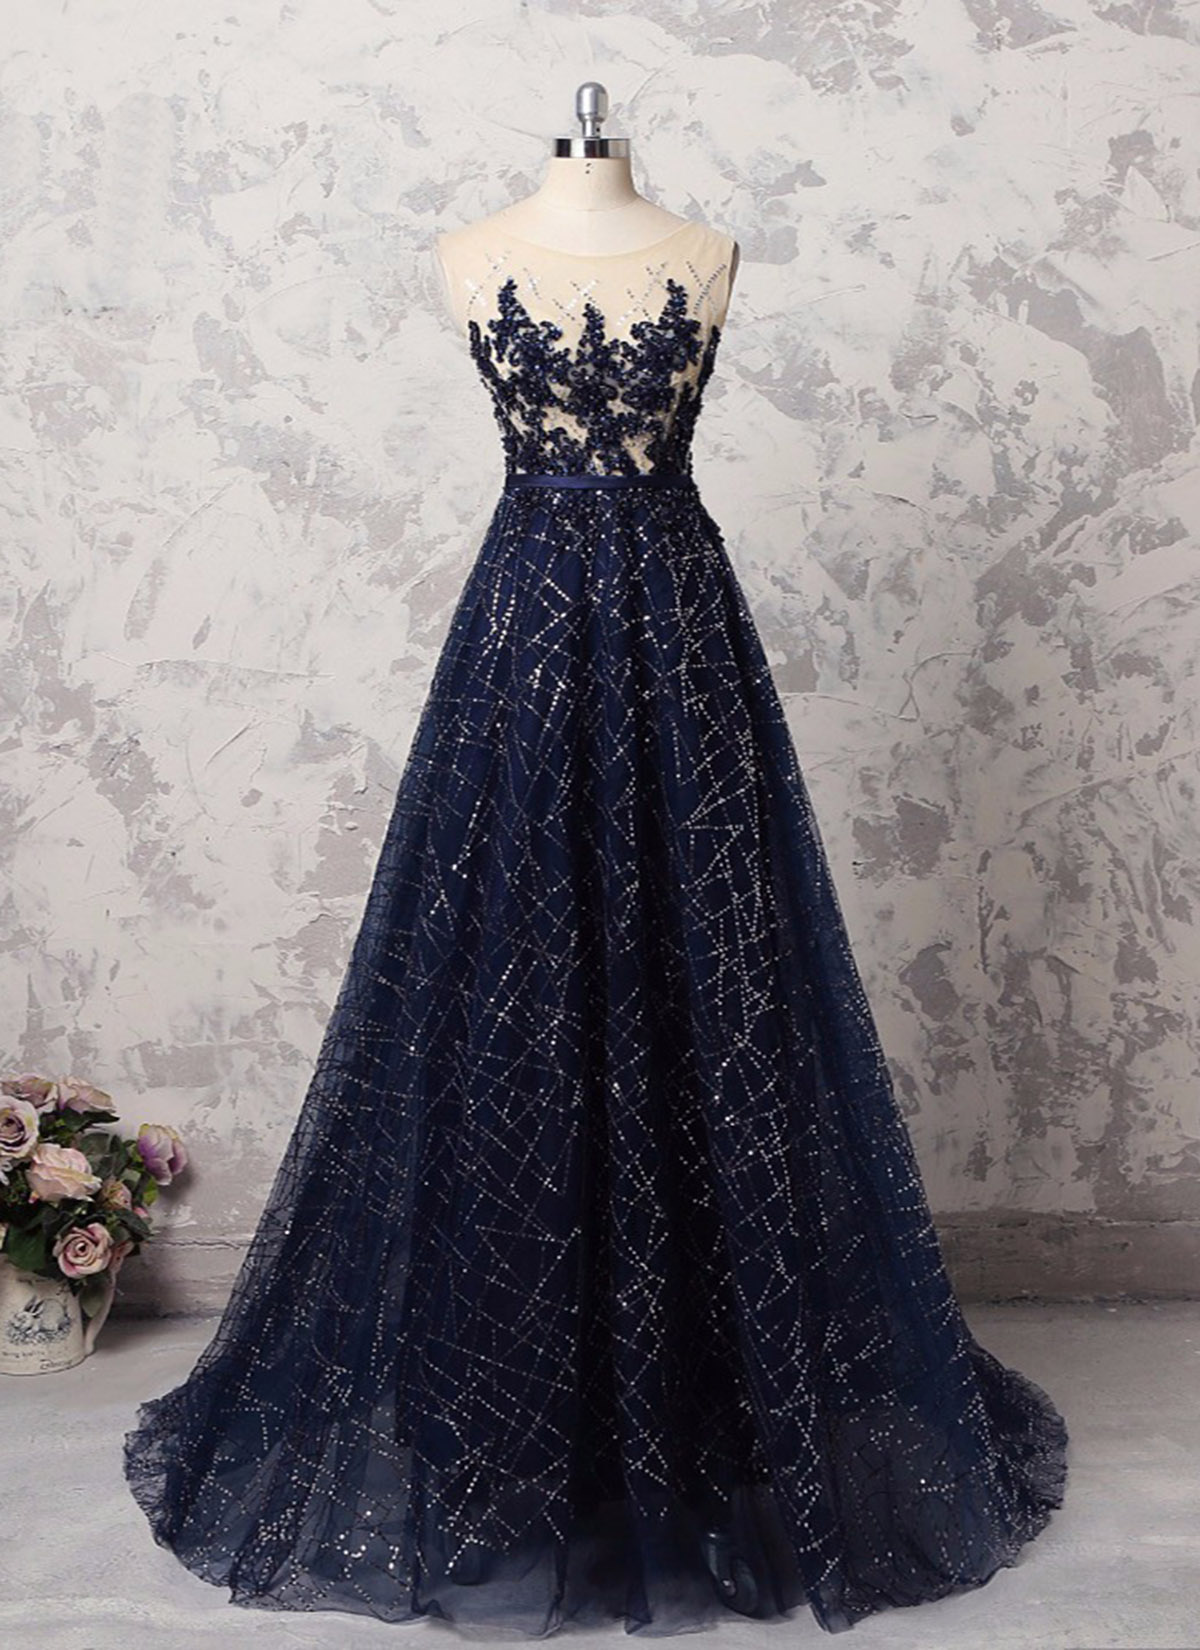 Navy Blue, Sequins Tulle Long, Halter Formal Prom Dress With Appliques,evening Dress